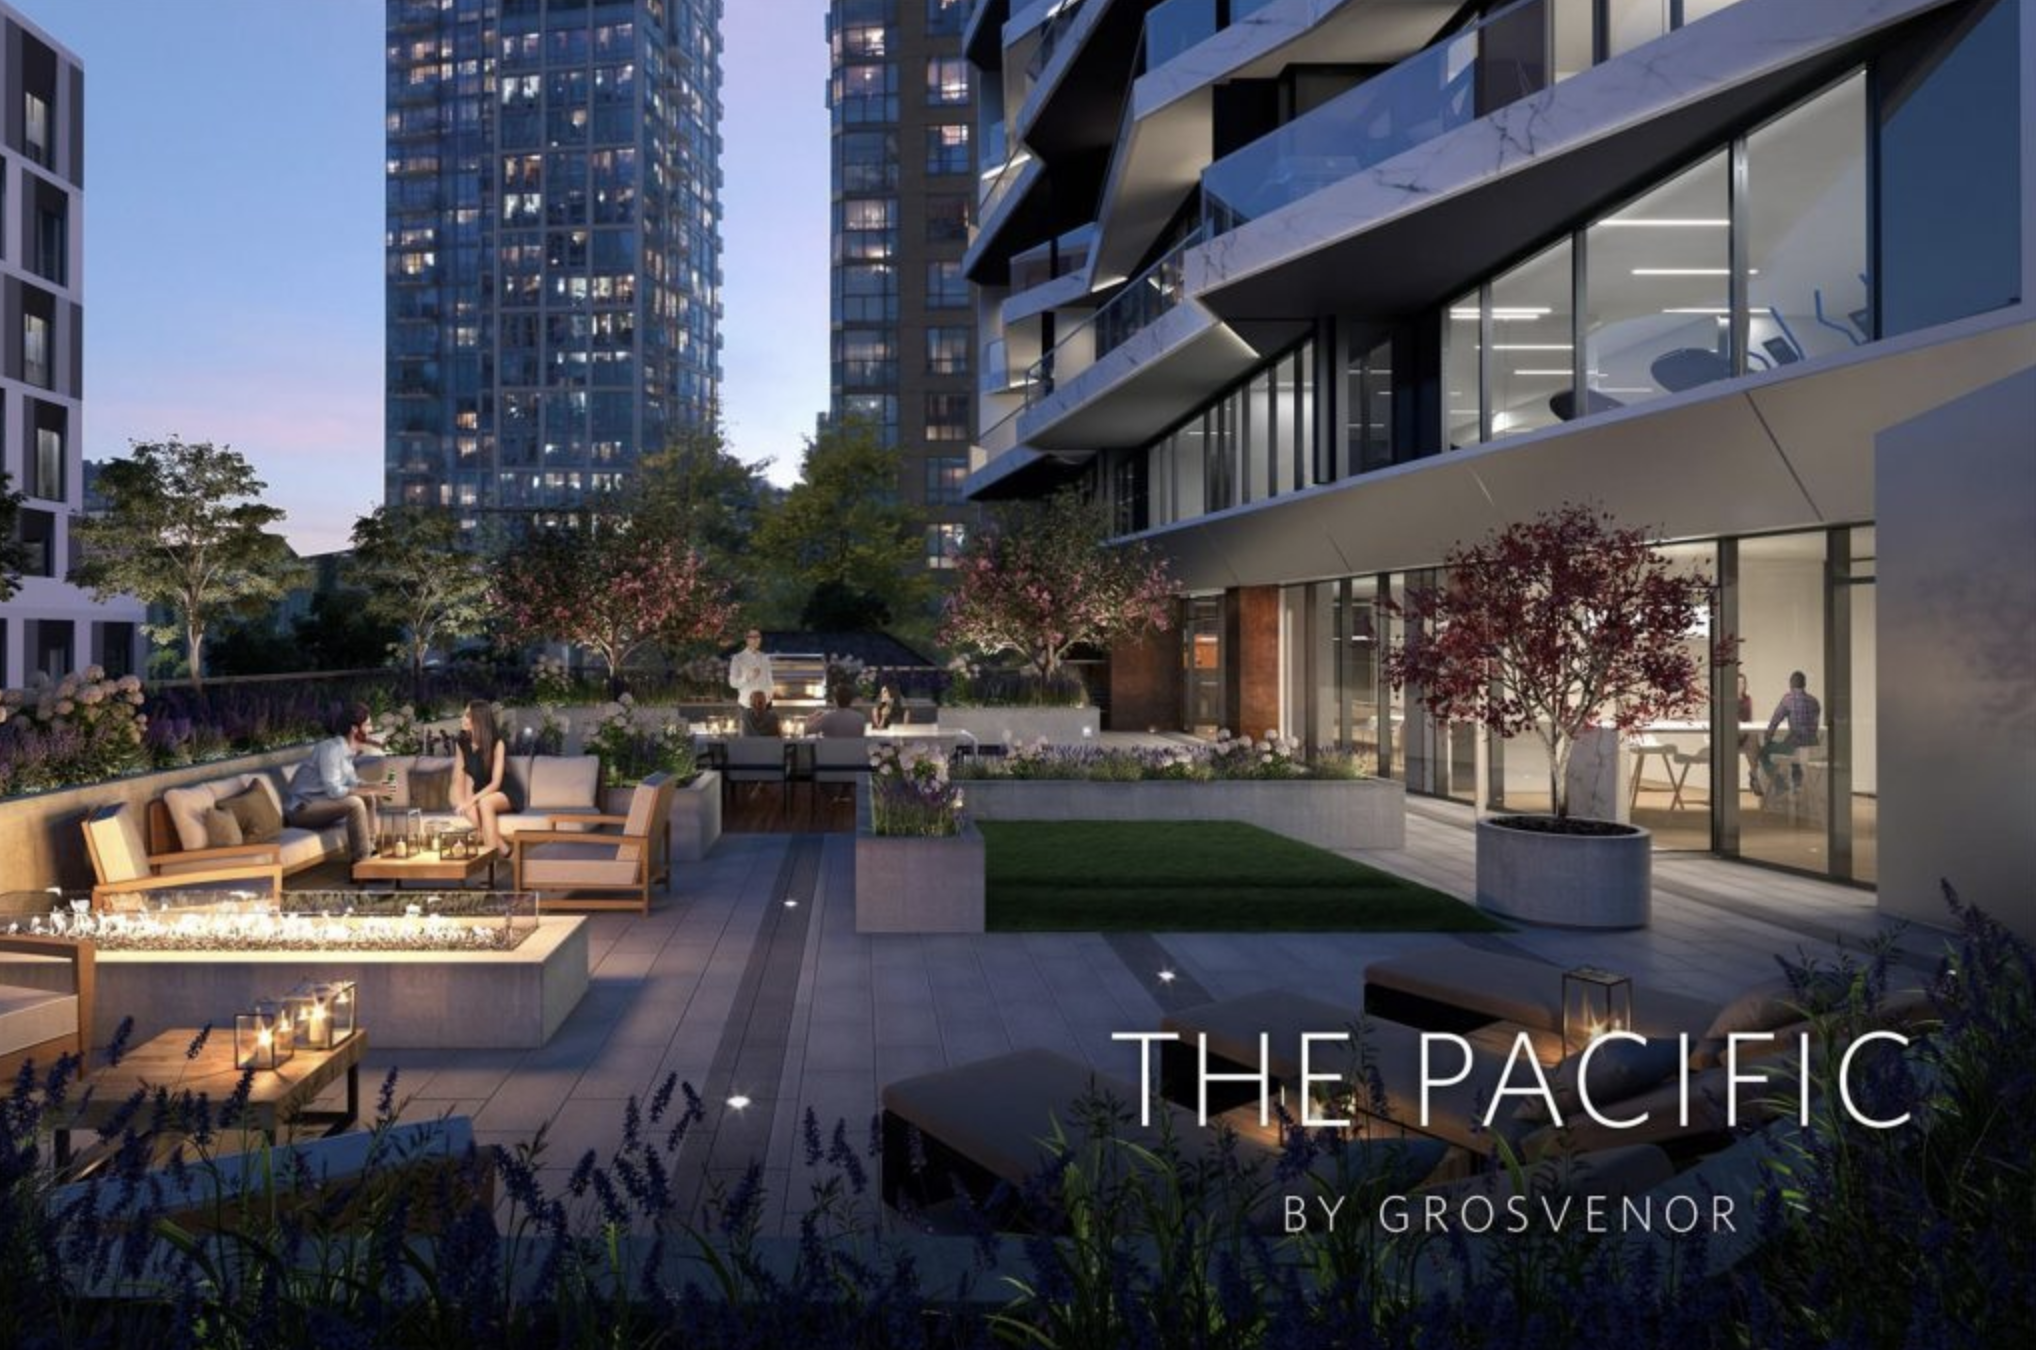 The Pacific by Grosvenor